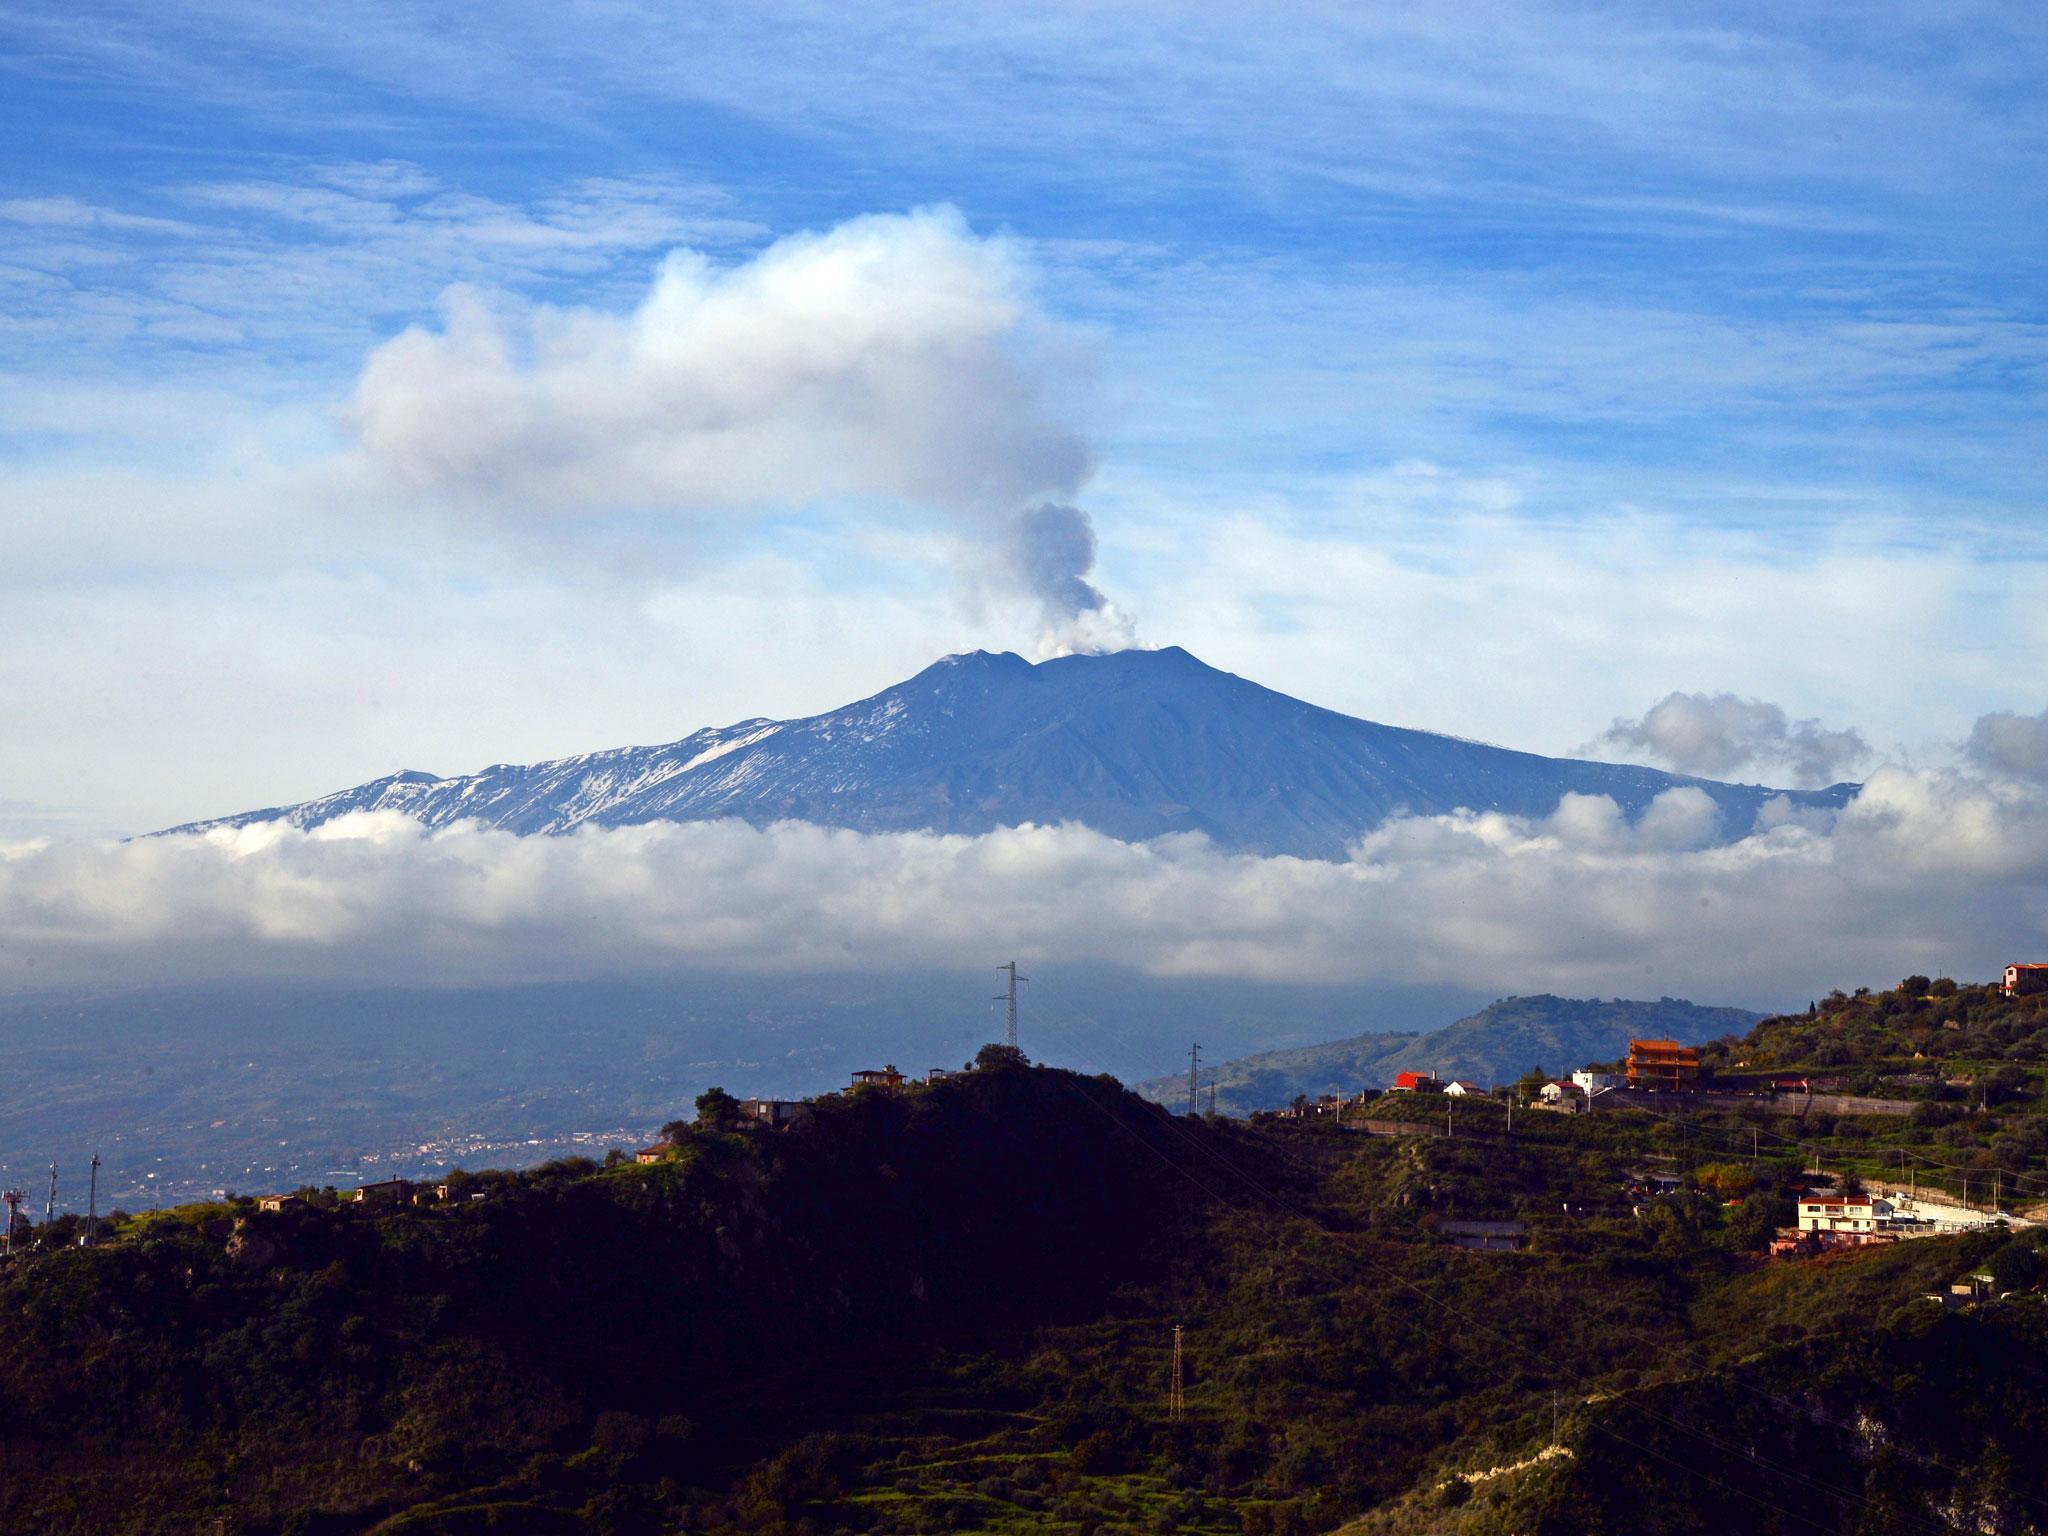 Mount Etna, the highest and most active volcano in Europe